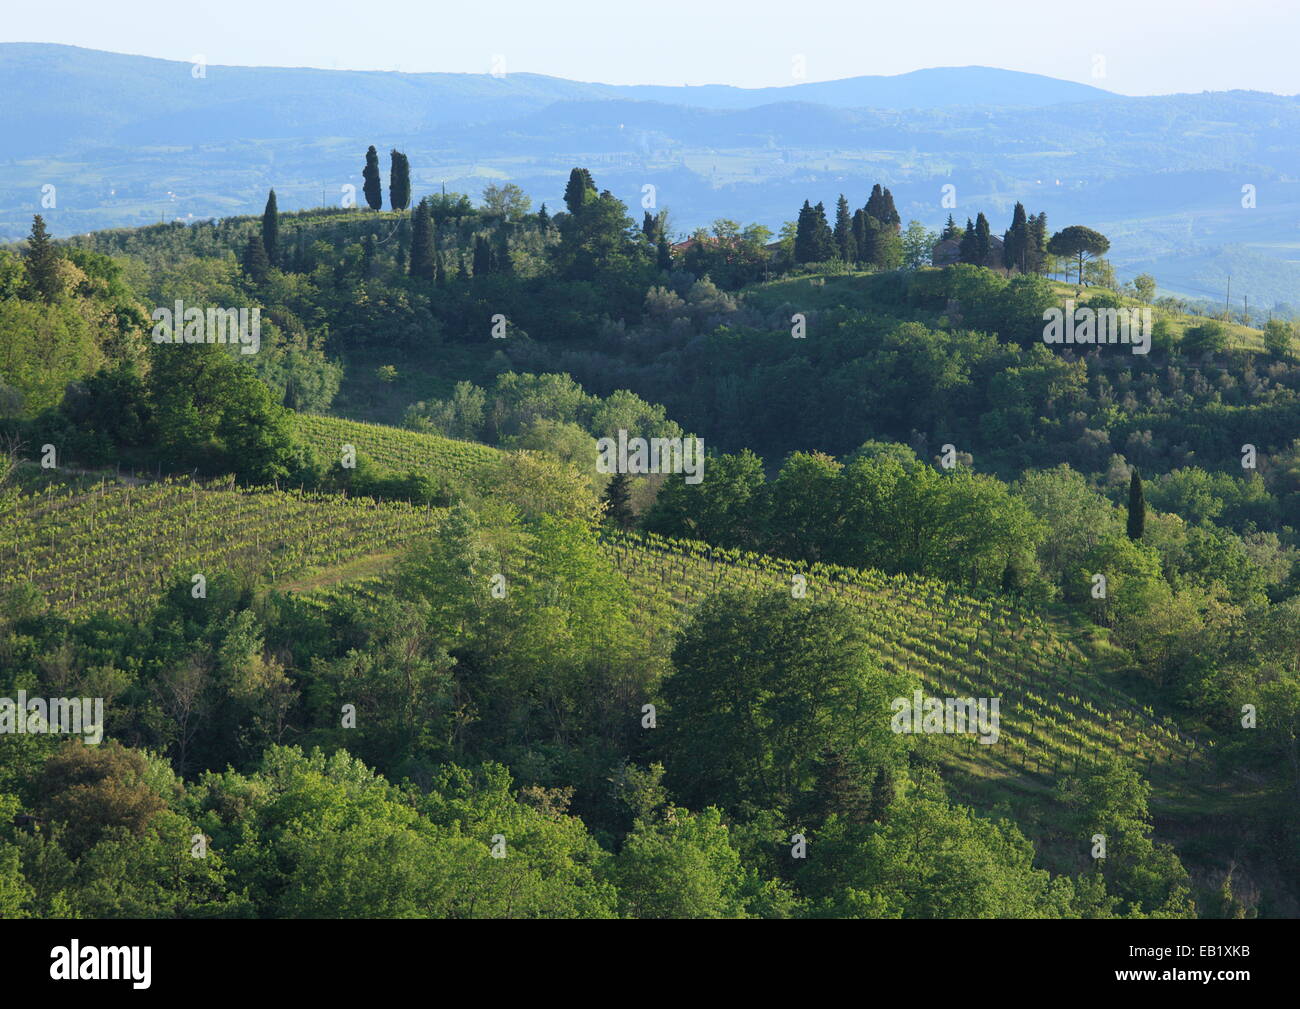 Green landscape of hills and vineyards in Tuscany, Italy. Stock Photo